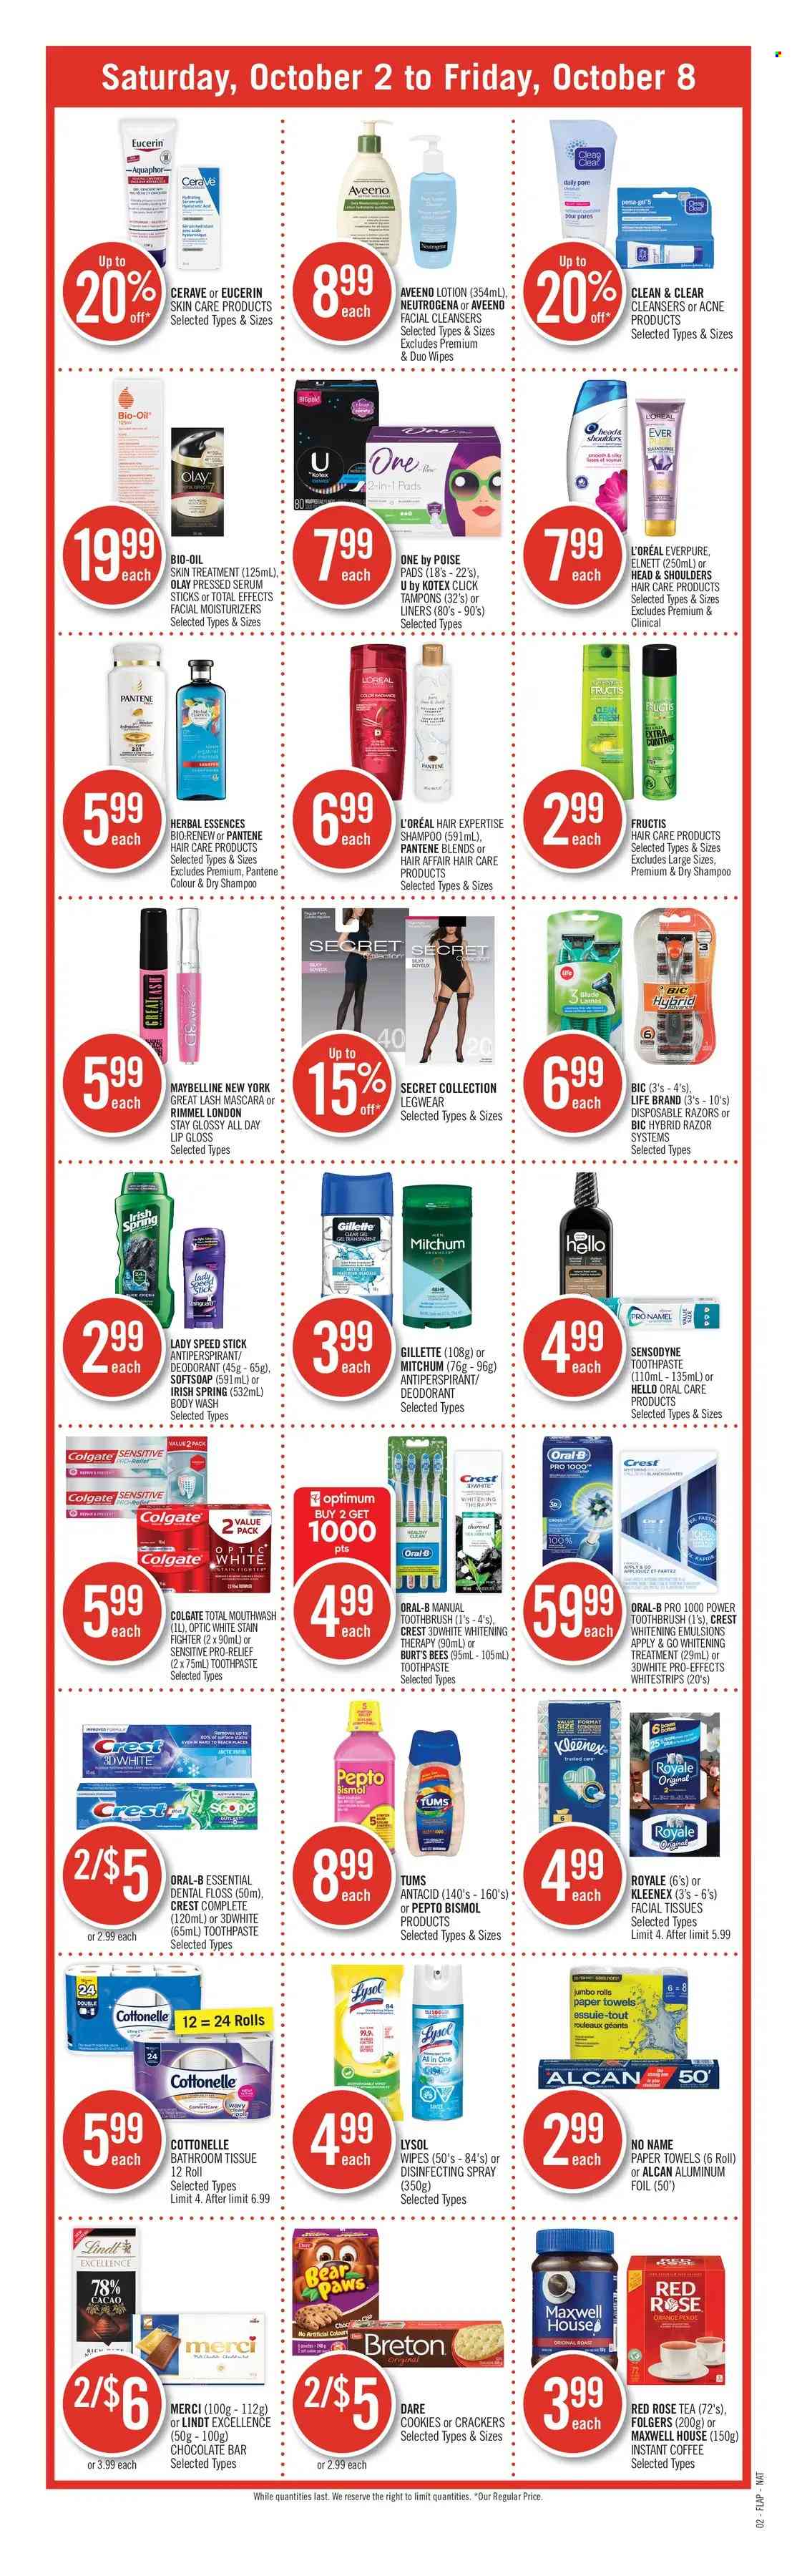 thumbnail - Shoppers Drug Mart Flyer - October 02, 2021 - October 08, 2021 - Sales products - cookies, crackers, Merci, chocolate bar, Maxwell House, tea, instant coffee, Folgers, wipes, Aquaphor, Aveeno, bath tissue, Cottonelle, Kleenex, kitchen towels, paper towels, Lysol, body wash, Softsoap, toothbrush, toothpaste, mouthwash, Crest, Kotex, tampons, CeraVe, facial tissues, L’Oréal, moisturizer, serum, Olay, Clean & Clear, Herbal Essences, Fructis, body lotion, anti-perspirant, Speed Stick, BIC, razor, disposable razor, lip gloss, mascara, Rimmel, Antacid, Colgate, Eucerin, Gillette, Maybelline, Neutrogena, shampoo, Head & Shoulders, Pantene, Oral-B, Sensodyne, Lindt, deodorant. Page 15.